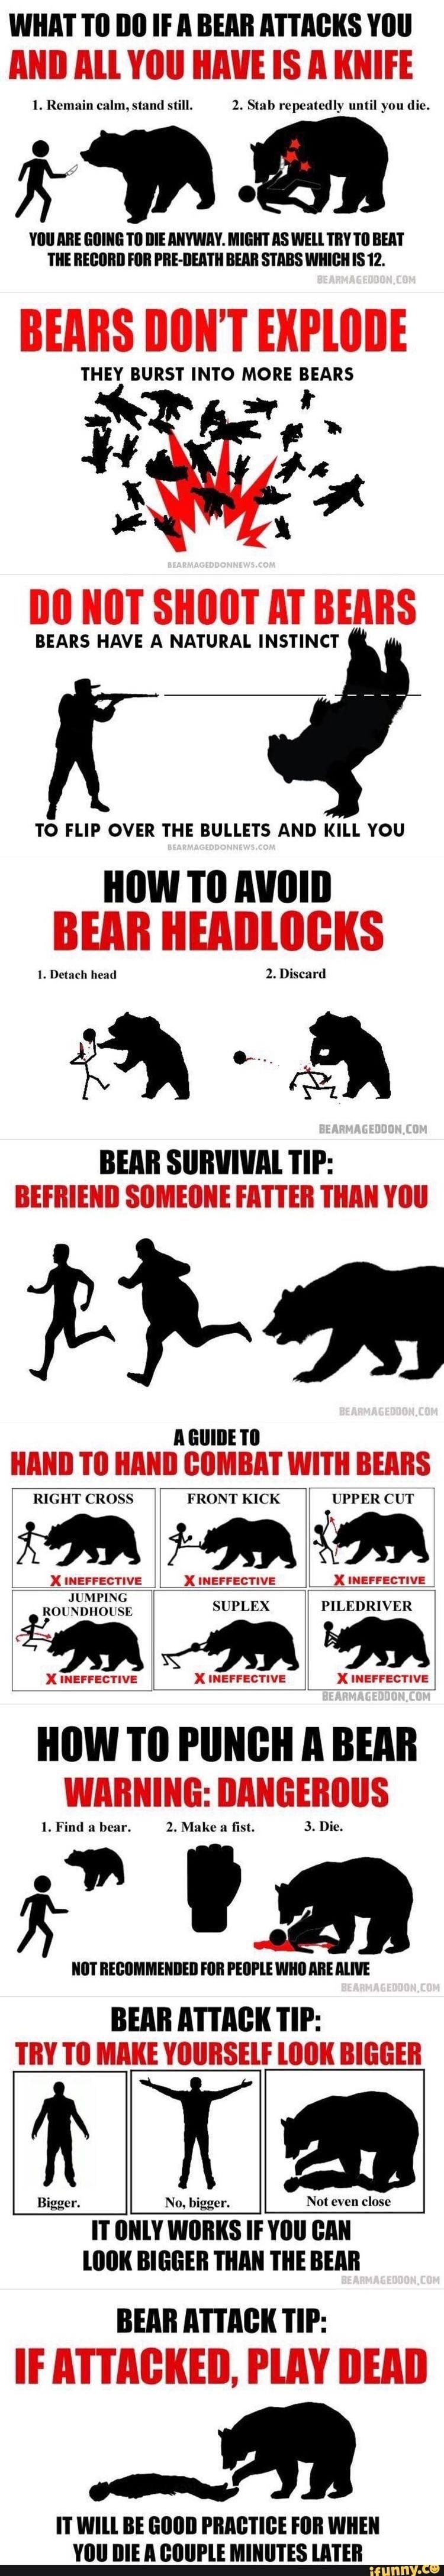 How to survive a bear attack...